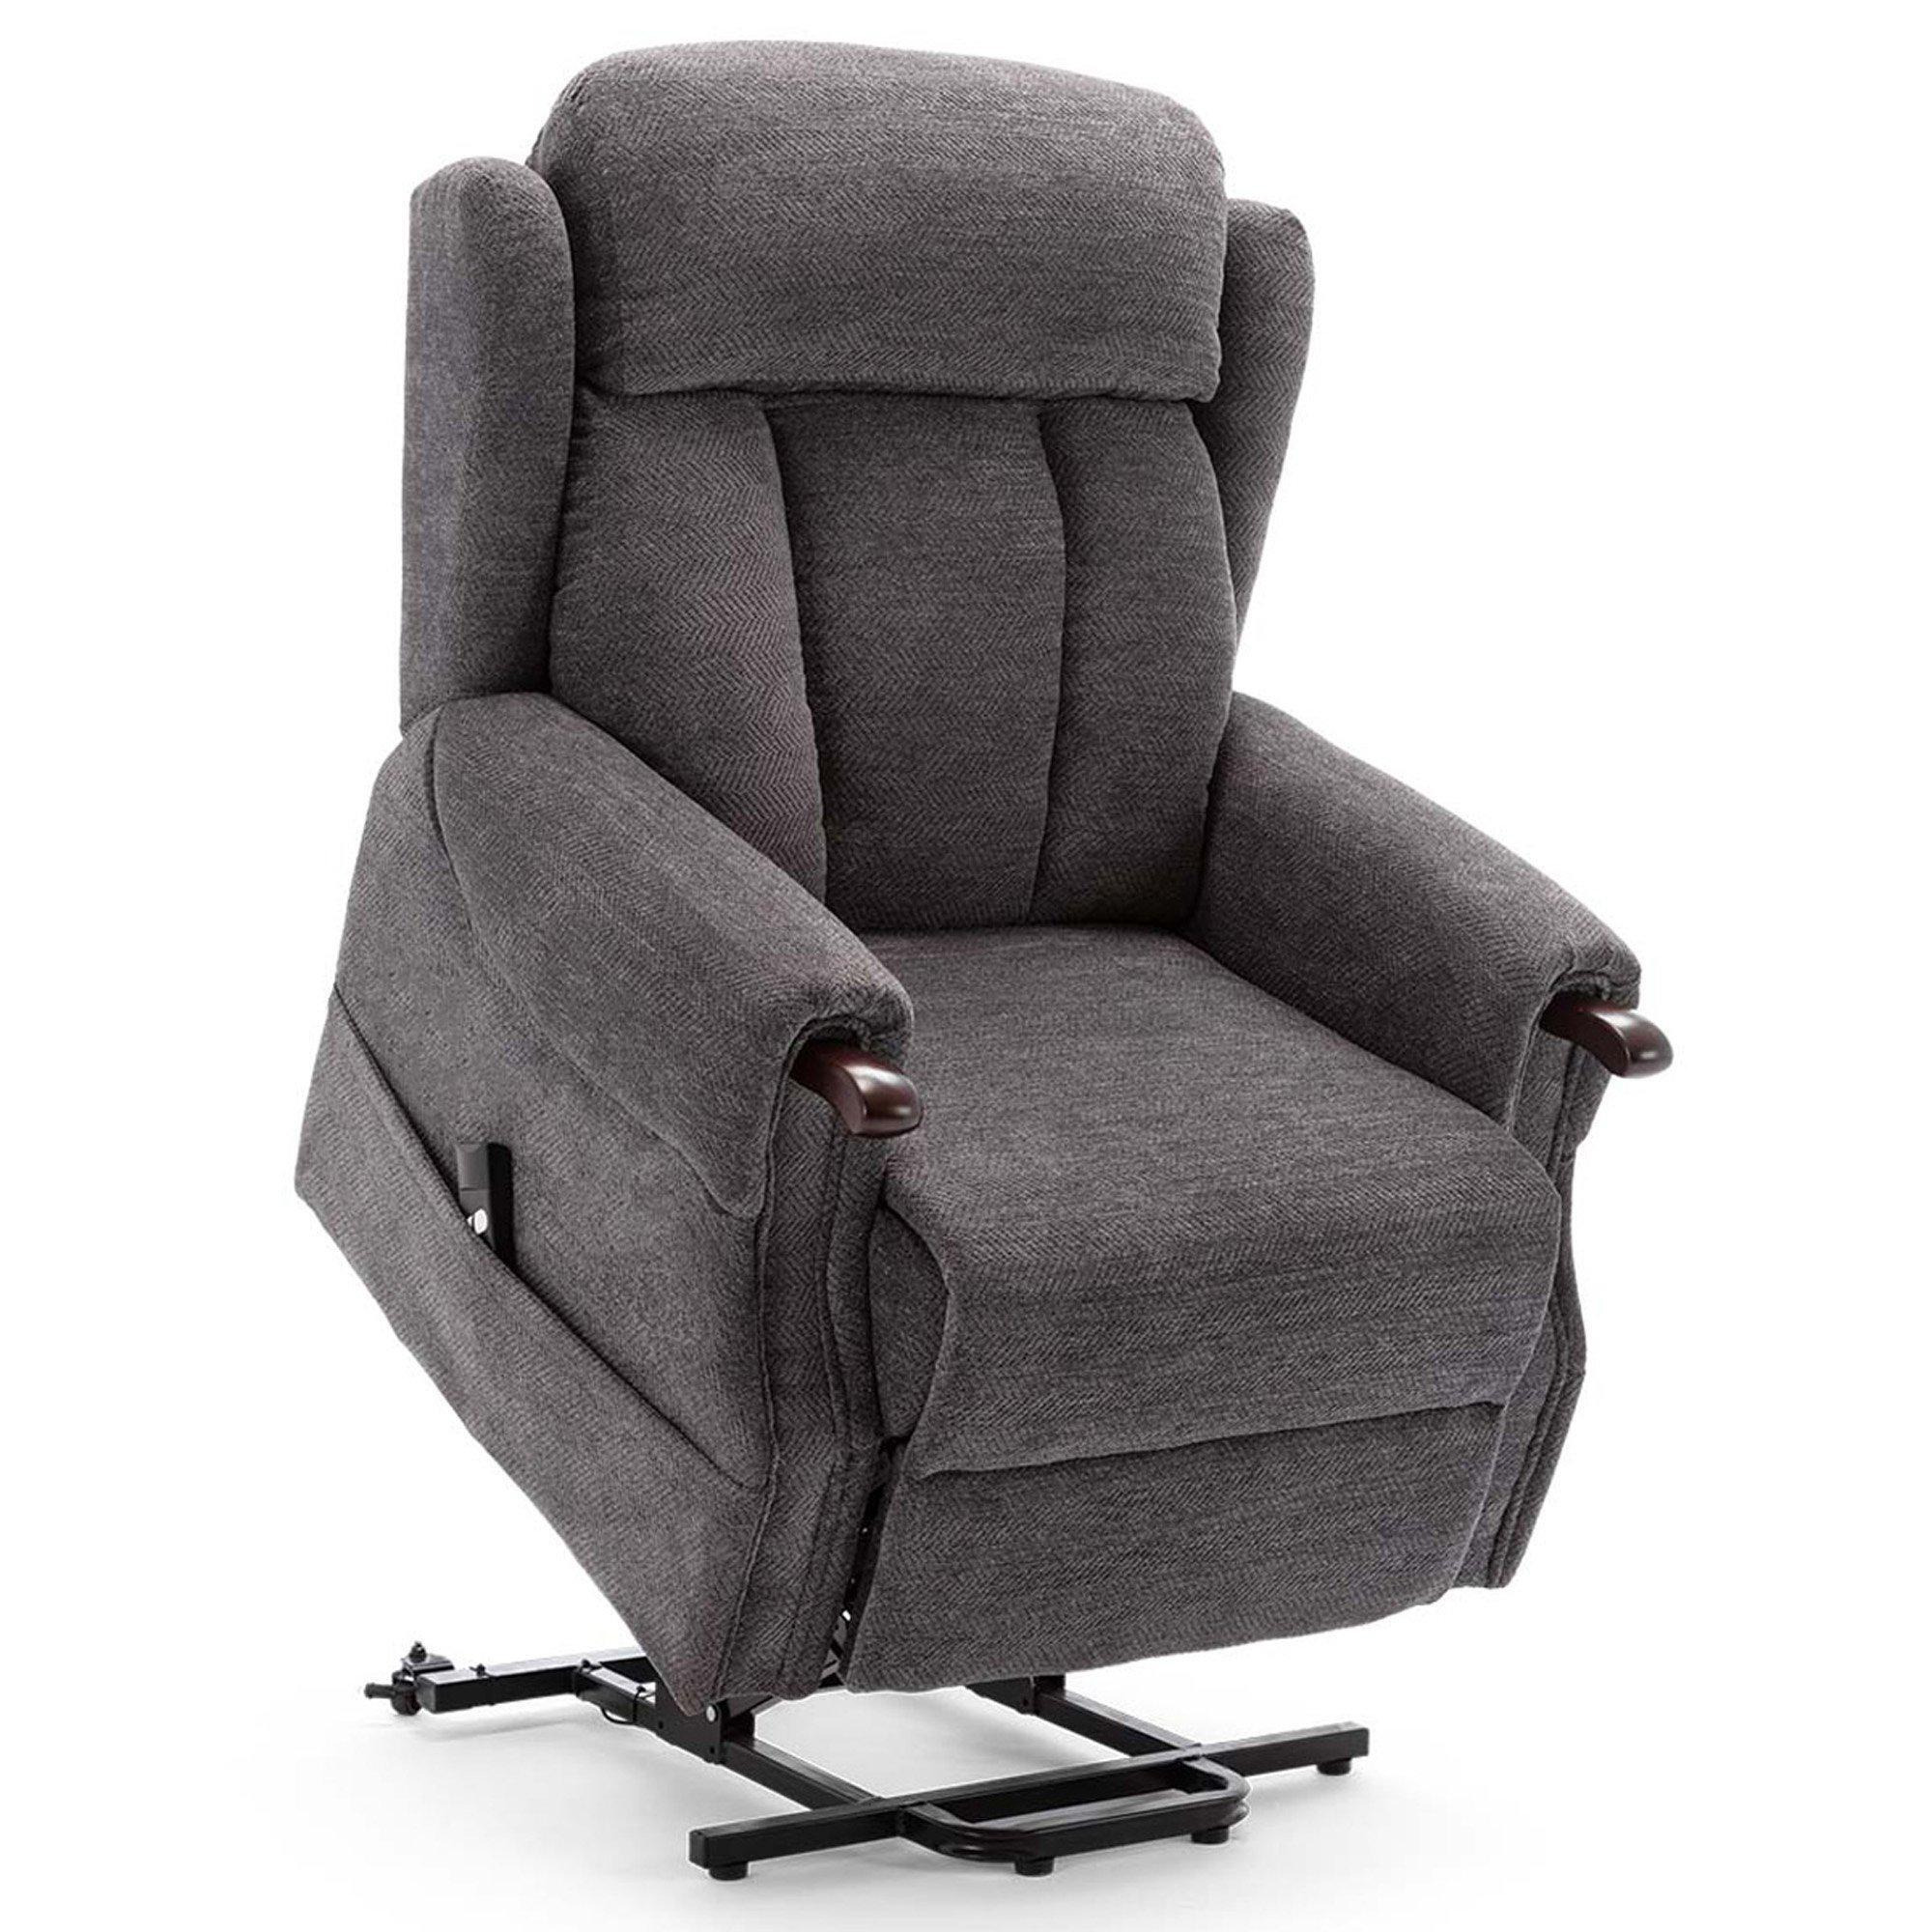 Halton Electric Fabric Single Motor Rise Recliner Lift Mobility Chair - image 1